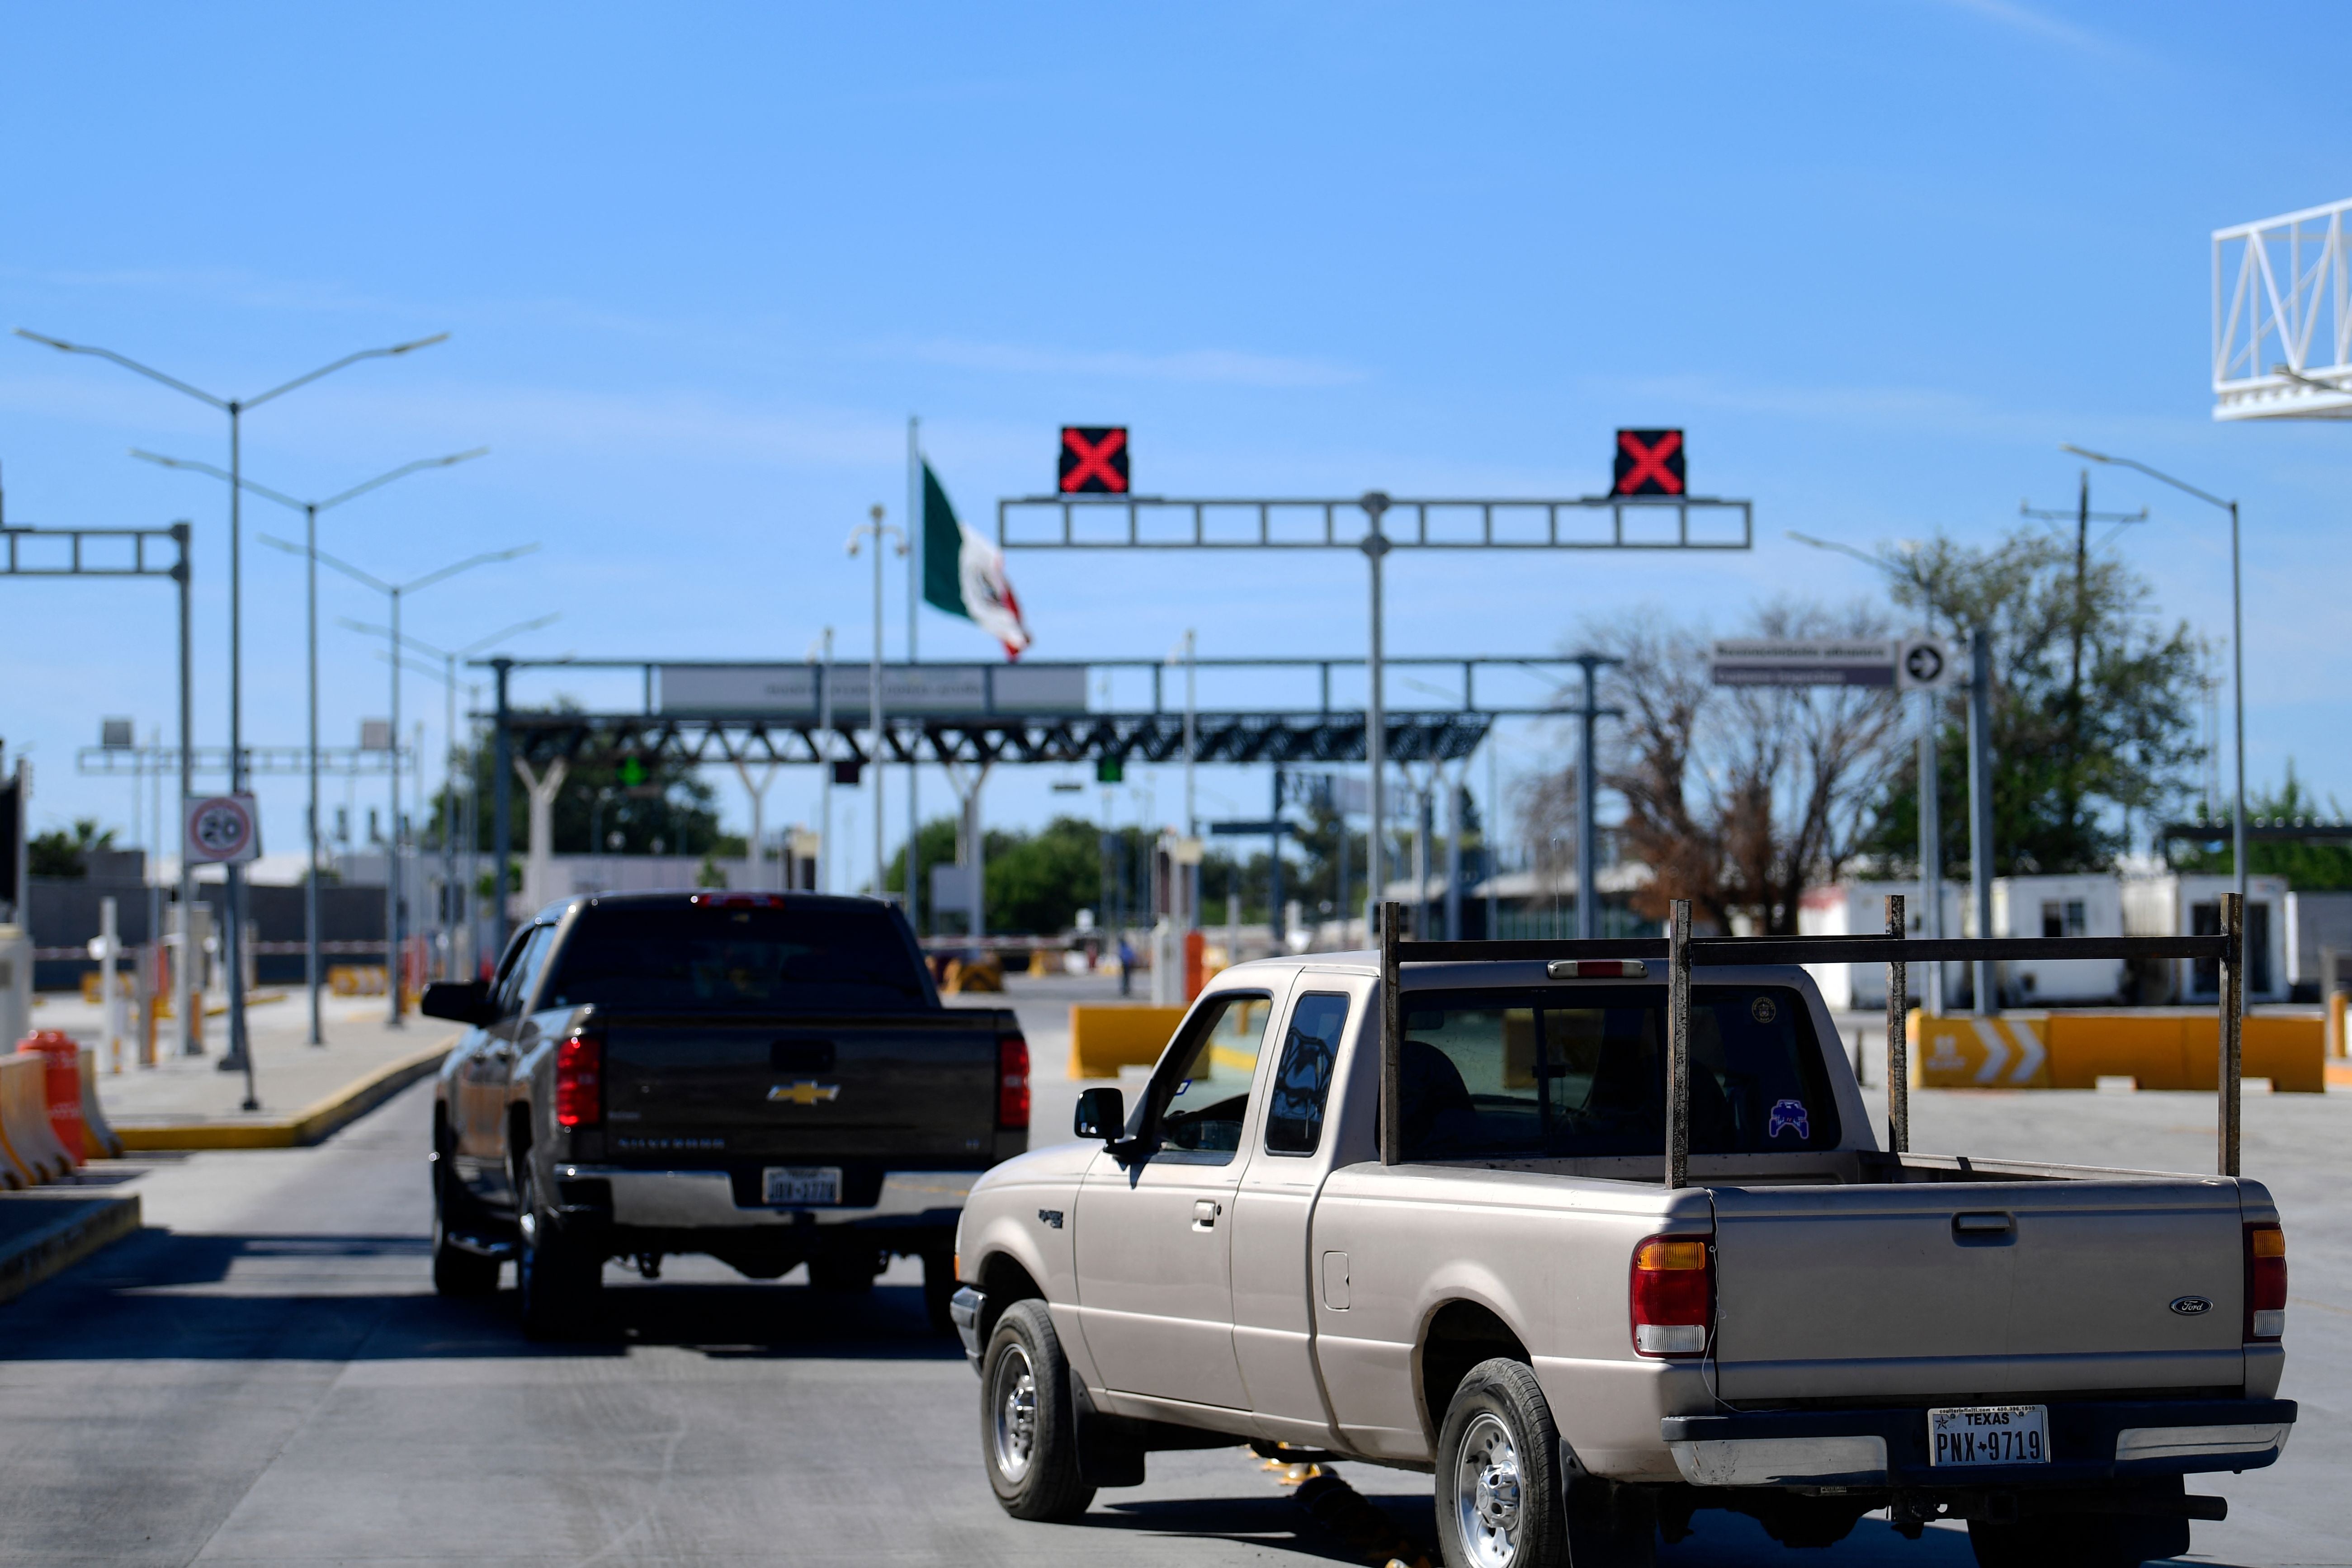 Cars wait in line to cross the border during the reopening of the Ciudad Acuna, Coahuila - Del Rio, Texas, US, international bridge in September 2021